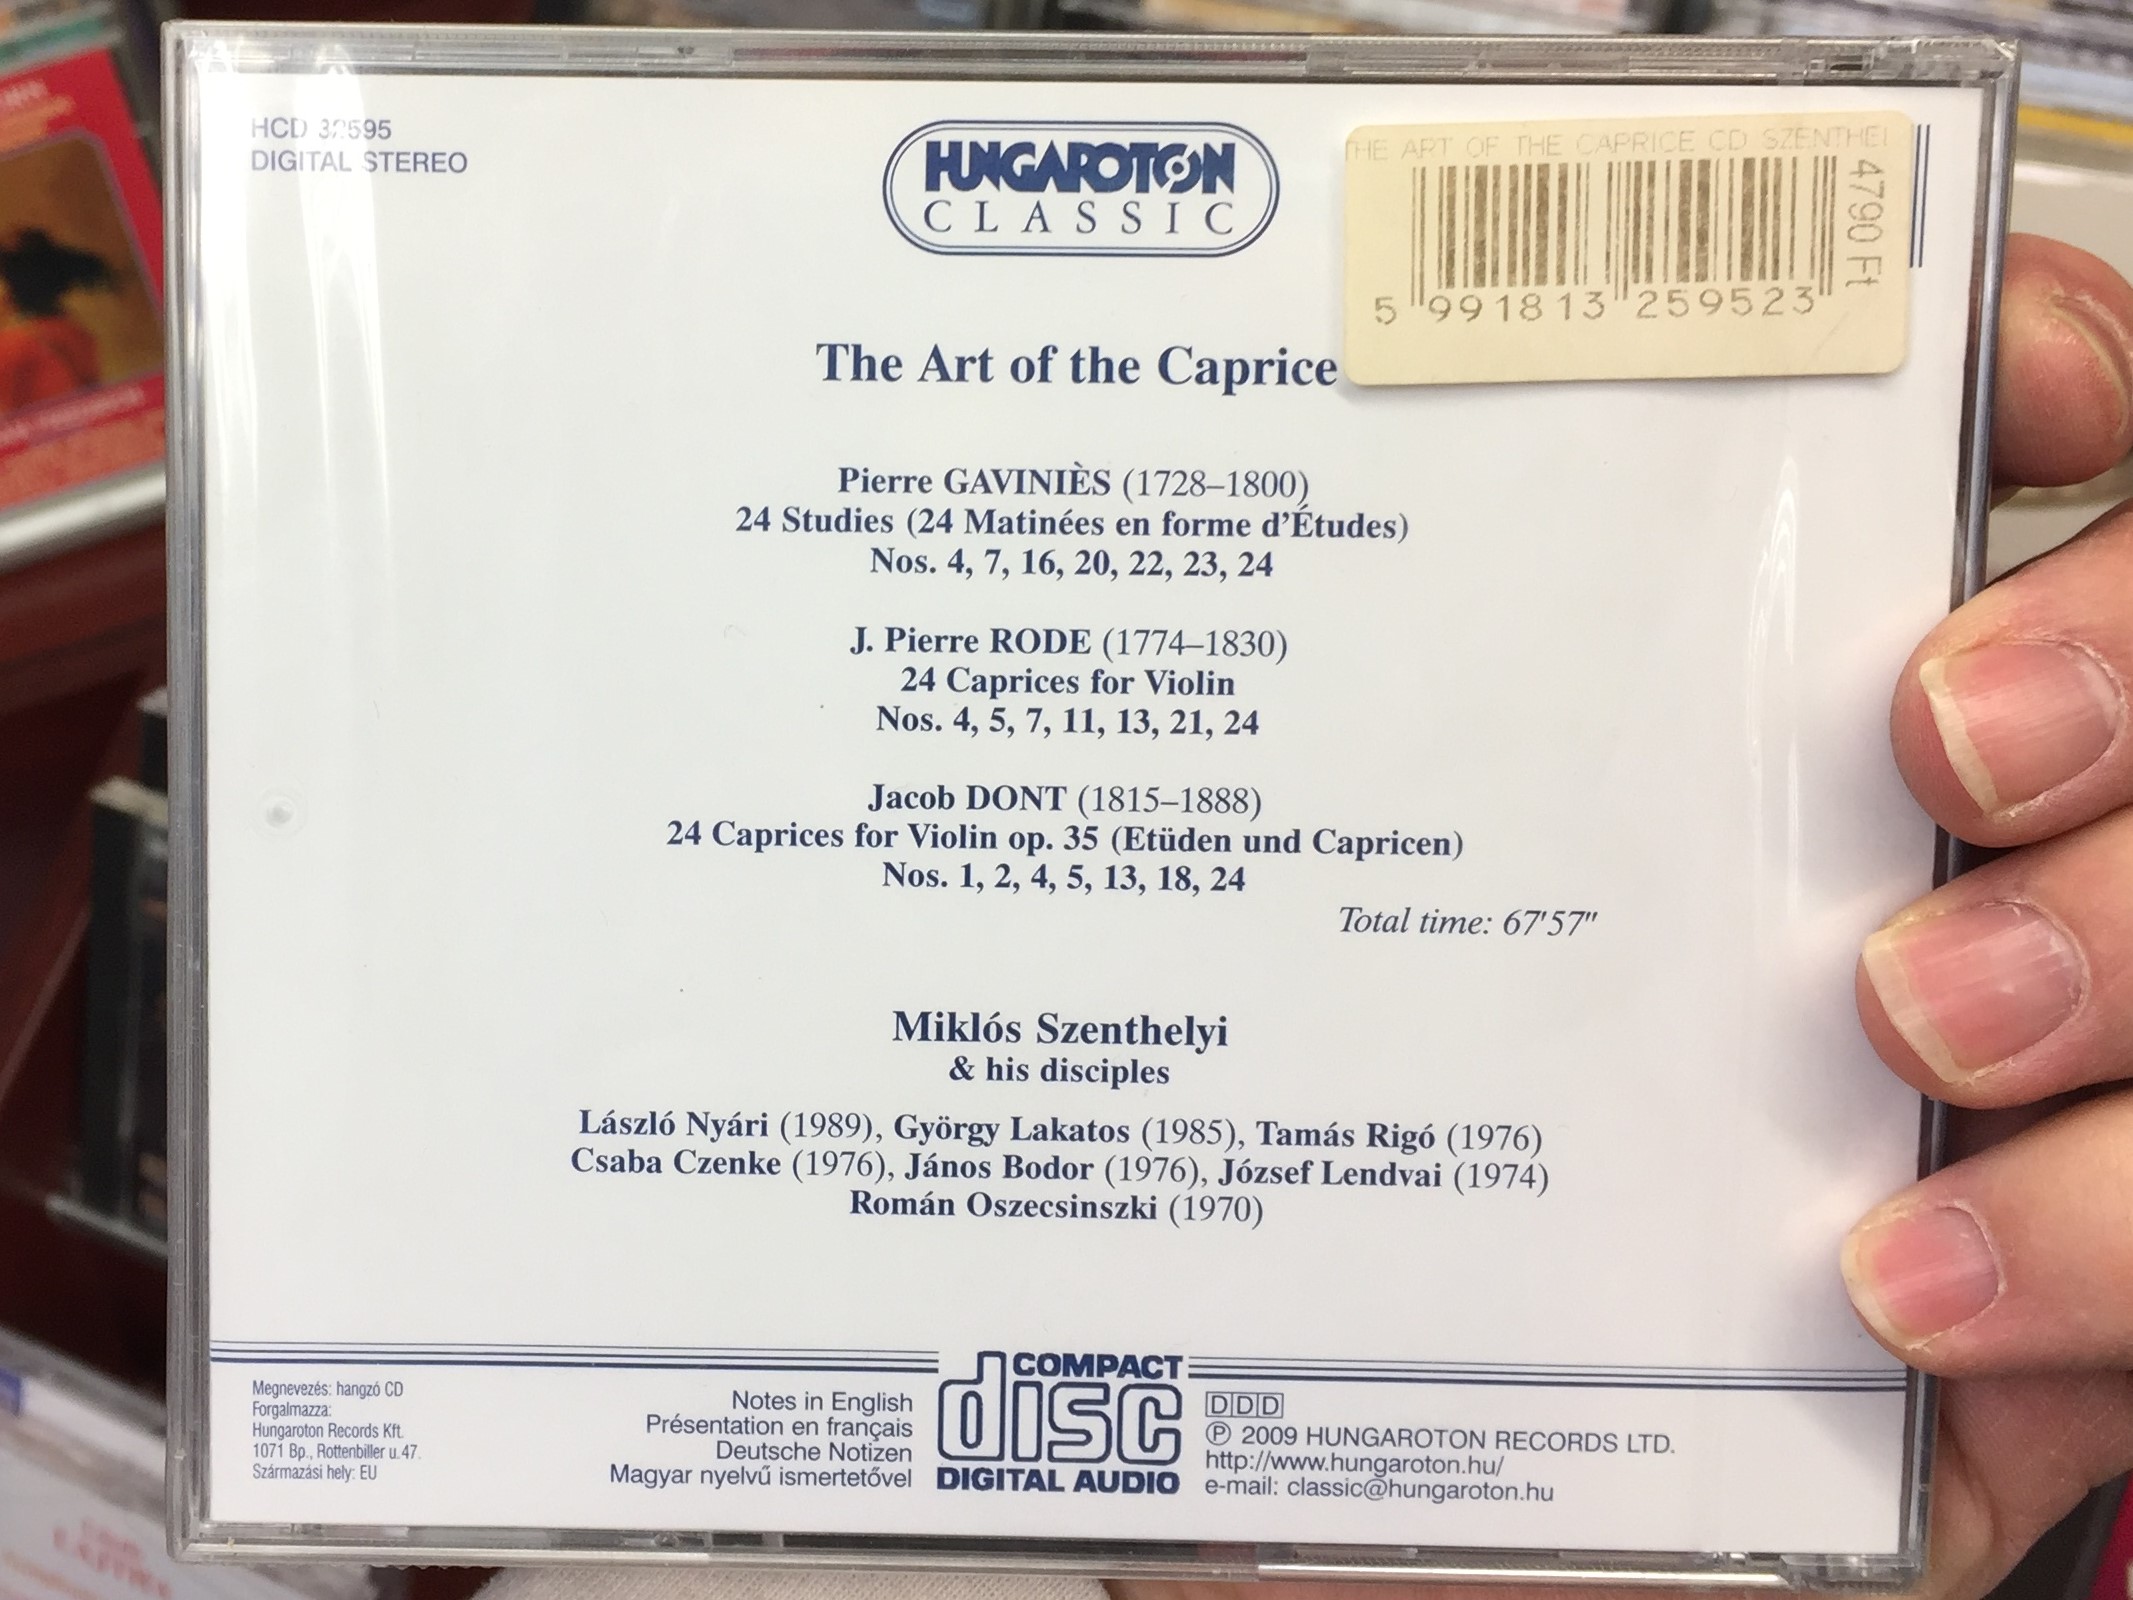 the-art-of-the-caprice-miklos-szenthelyi-his-disciples-works-by-j.-pierre-rode-pierre-gavinies-jacob-dont-hungaroton-classic-audio-cd-2009-stereo-hcd-32595-2-.jpg